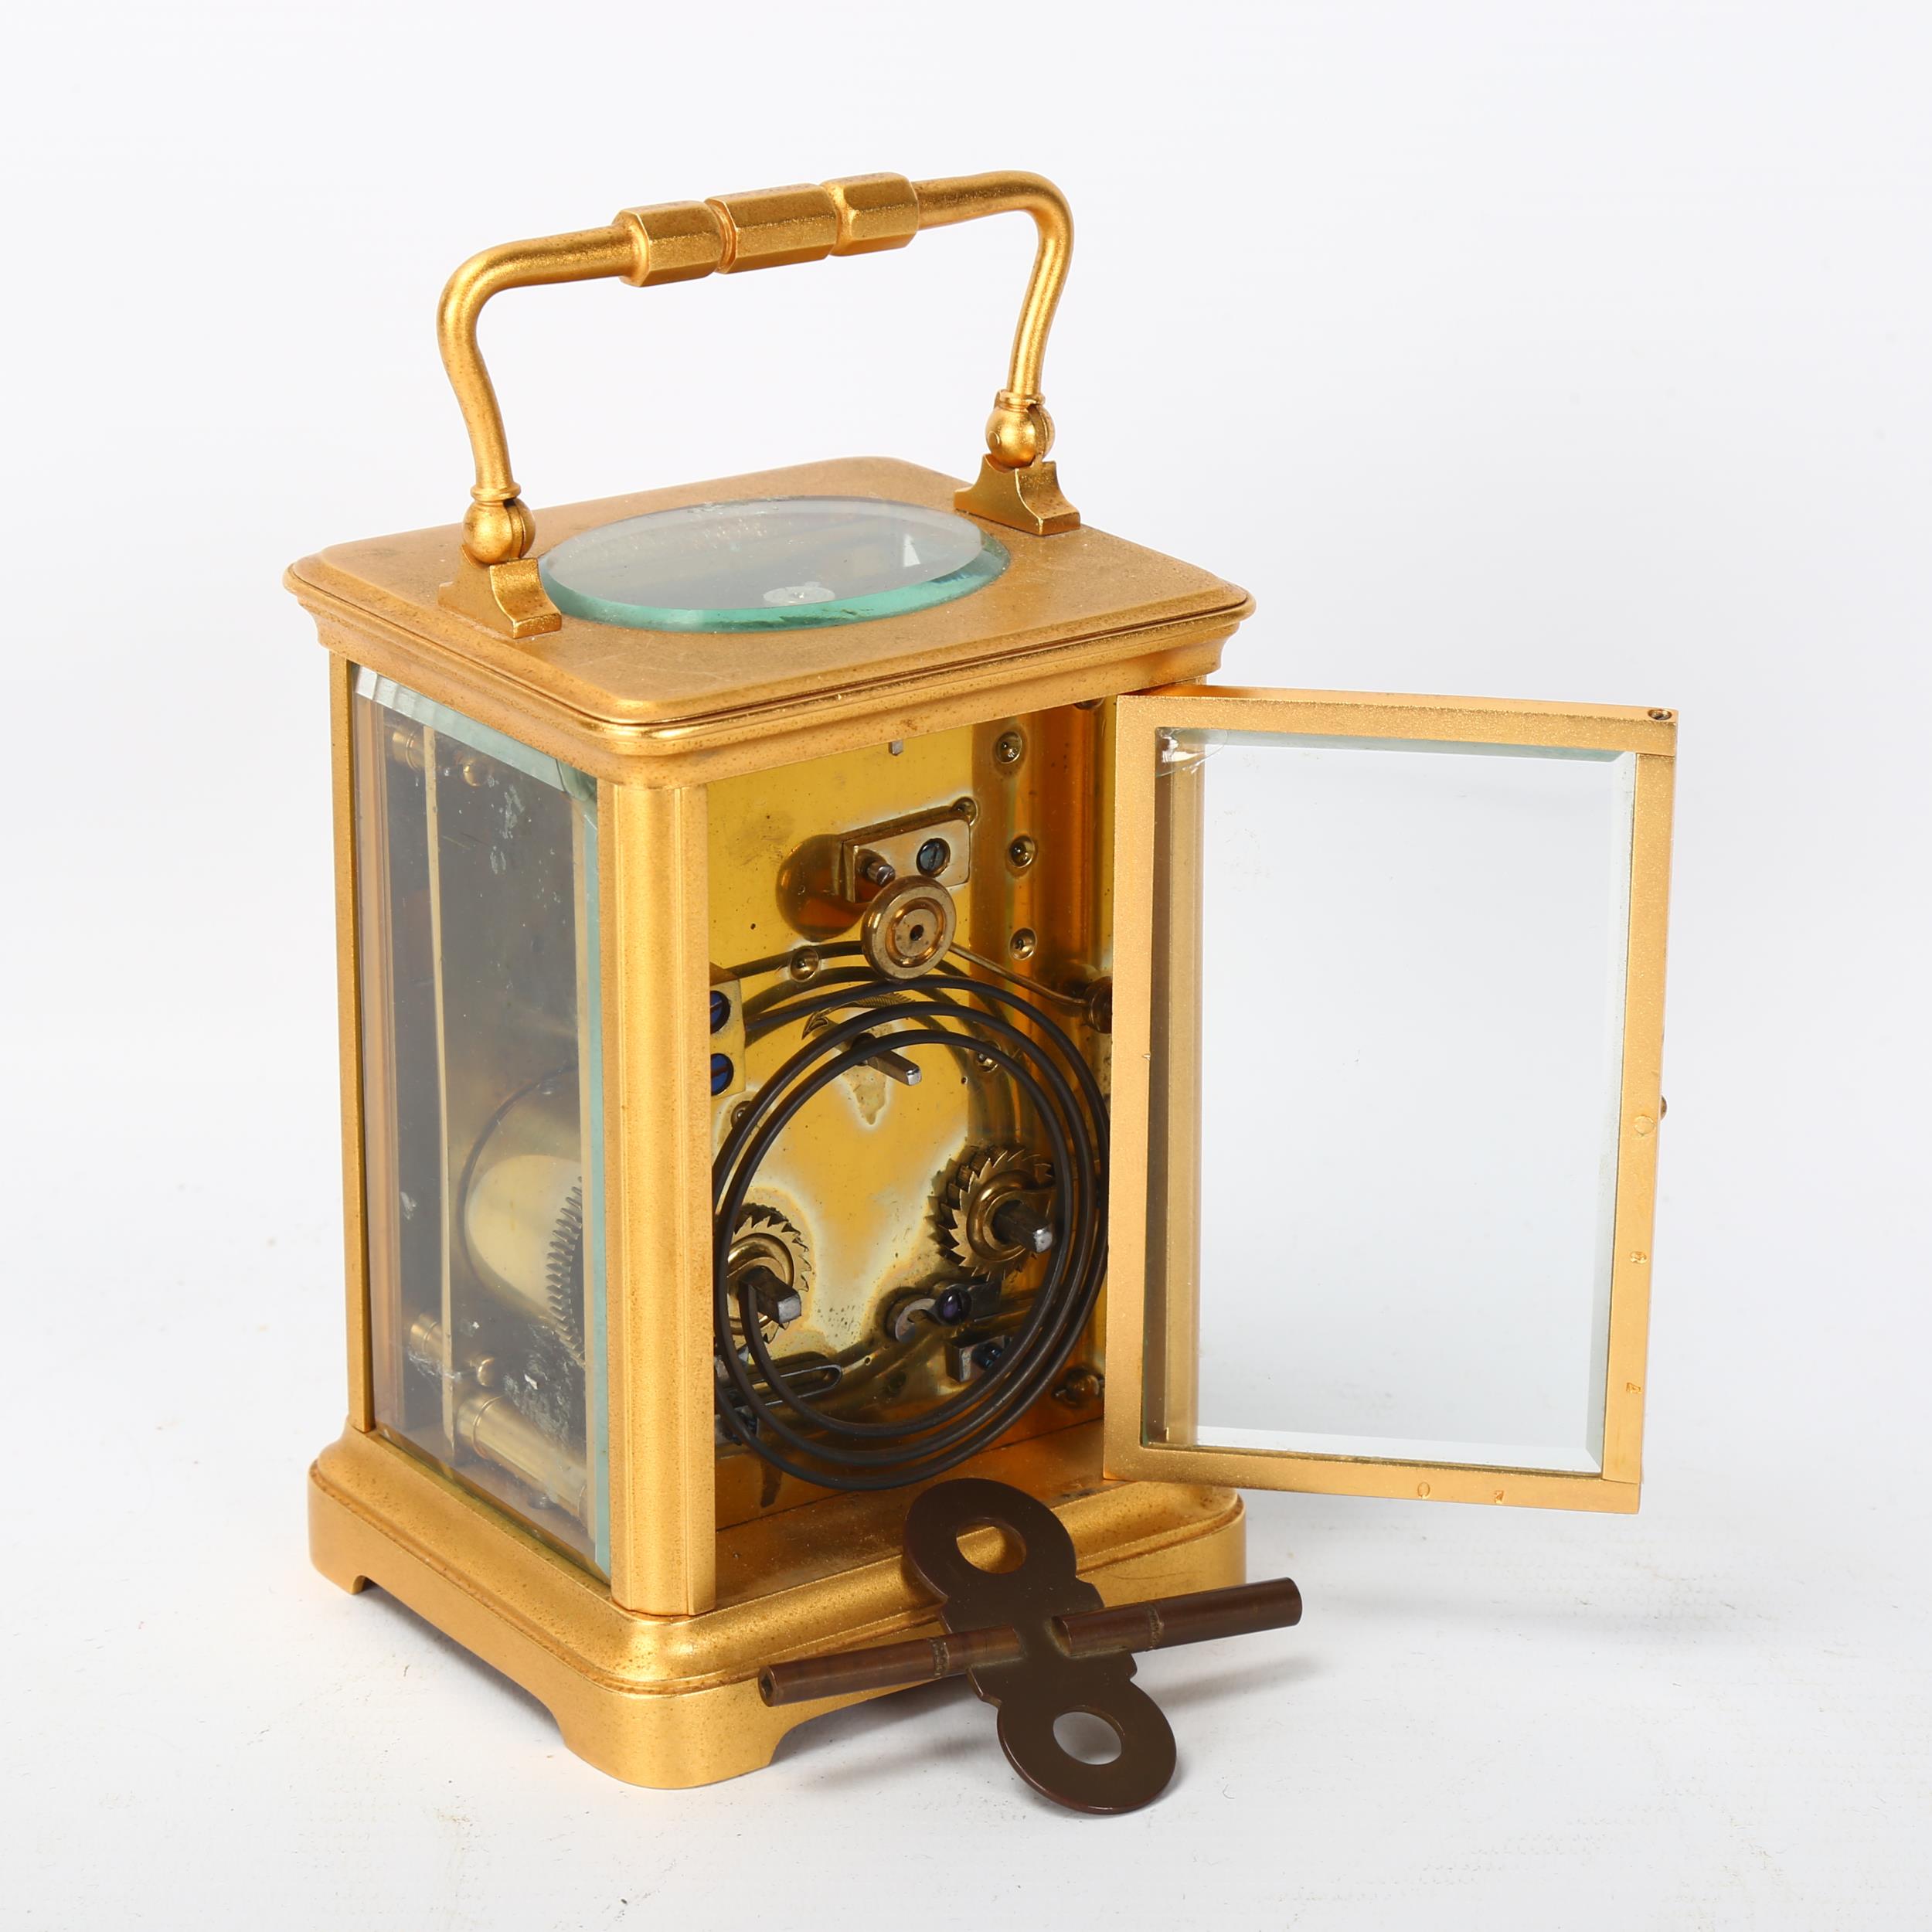 French gilt-brass carriage clock, enamel circular dial in gilded surround, 8-day movement striking - Image 3 of 3